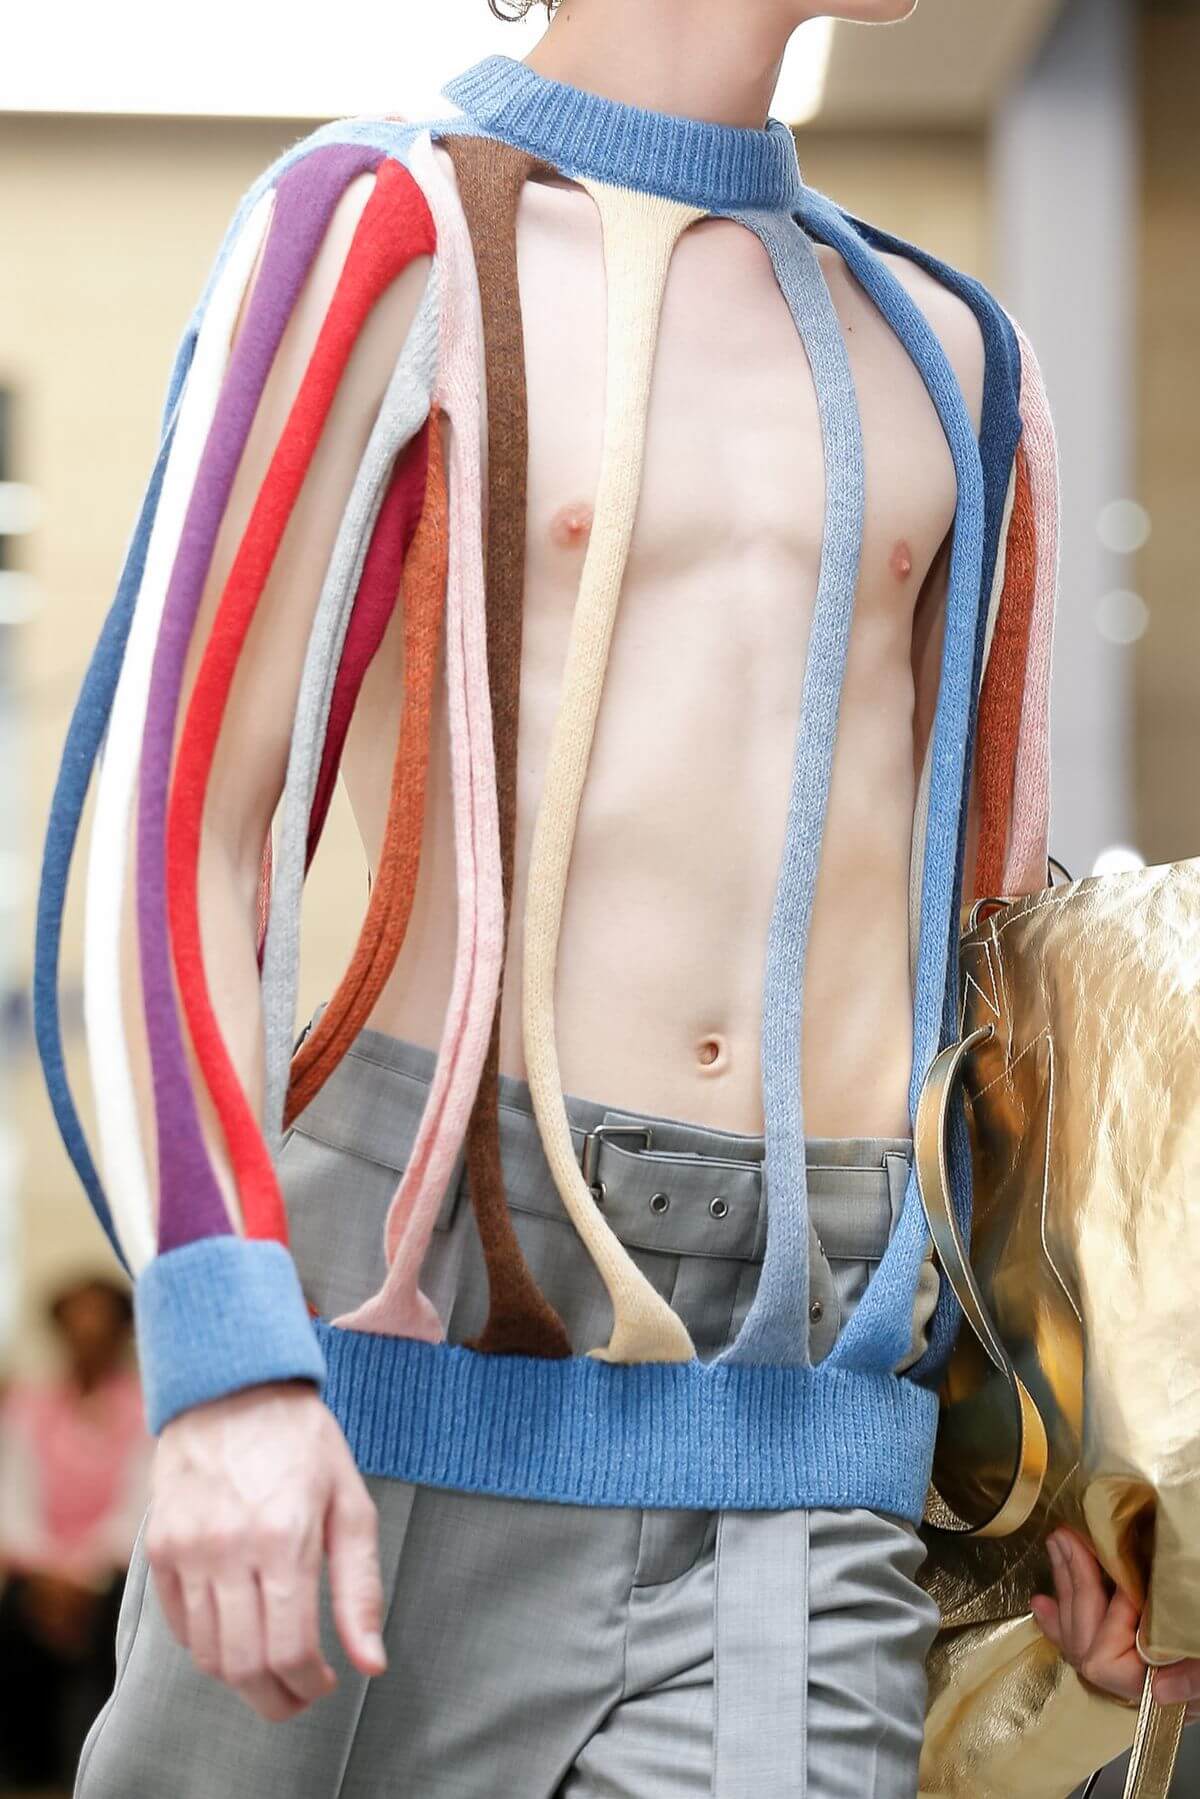 JW ANDERSON SS20